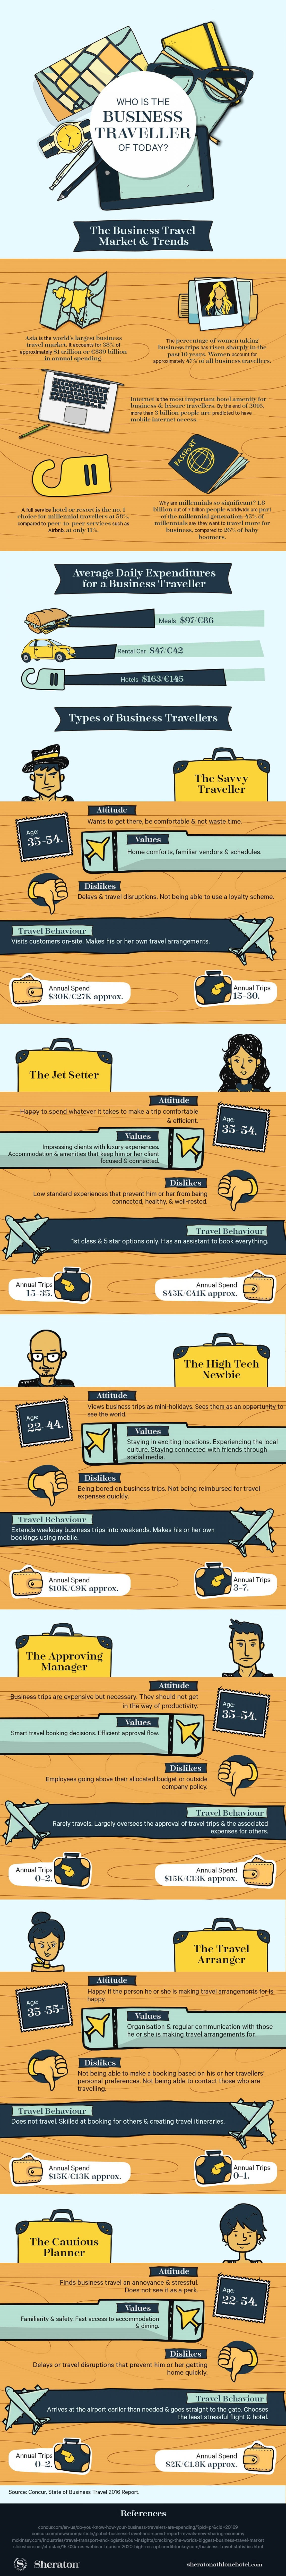 6 Types of Business Travellers - Travel Infographic